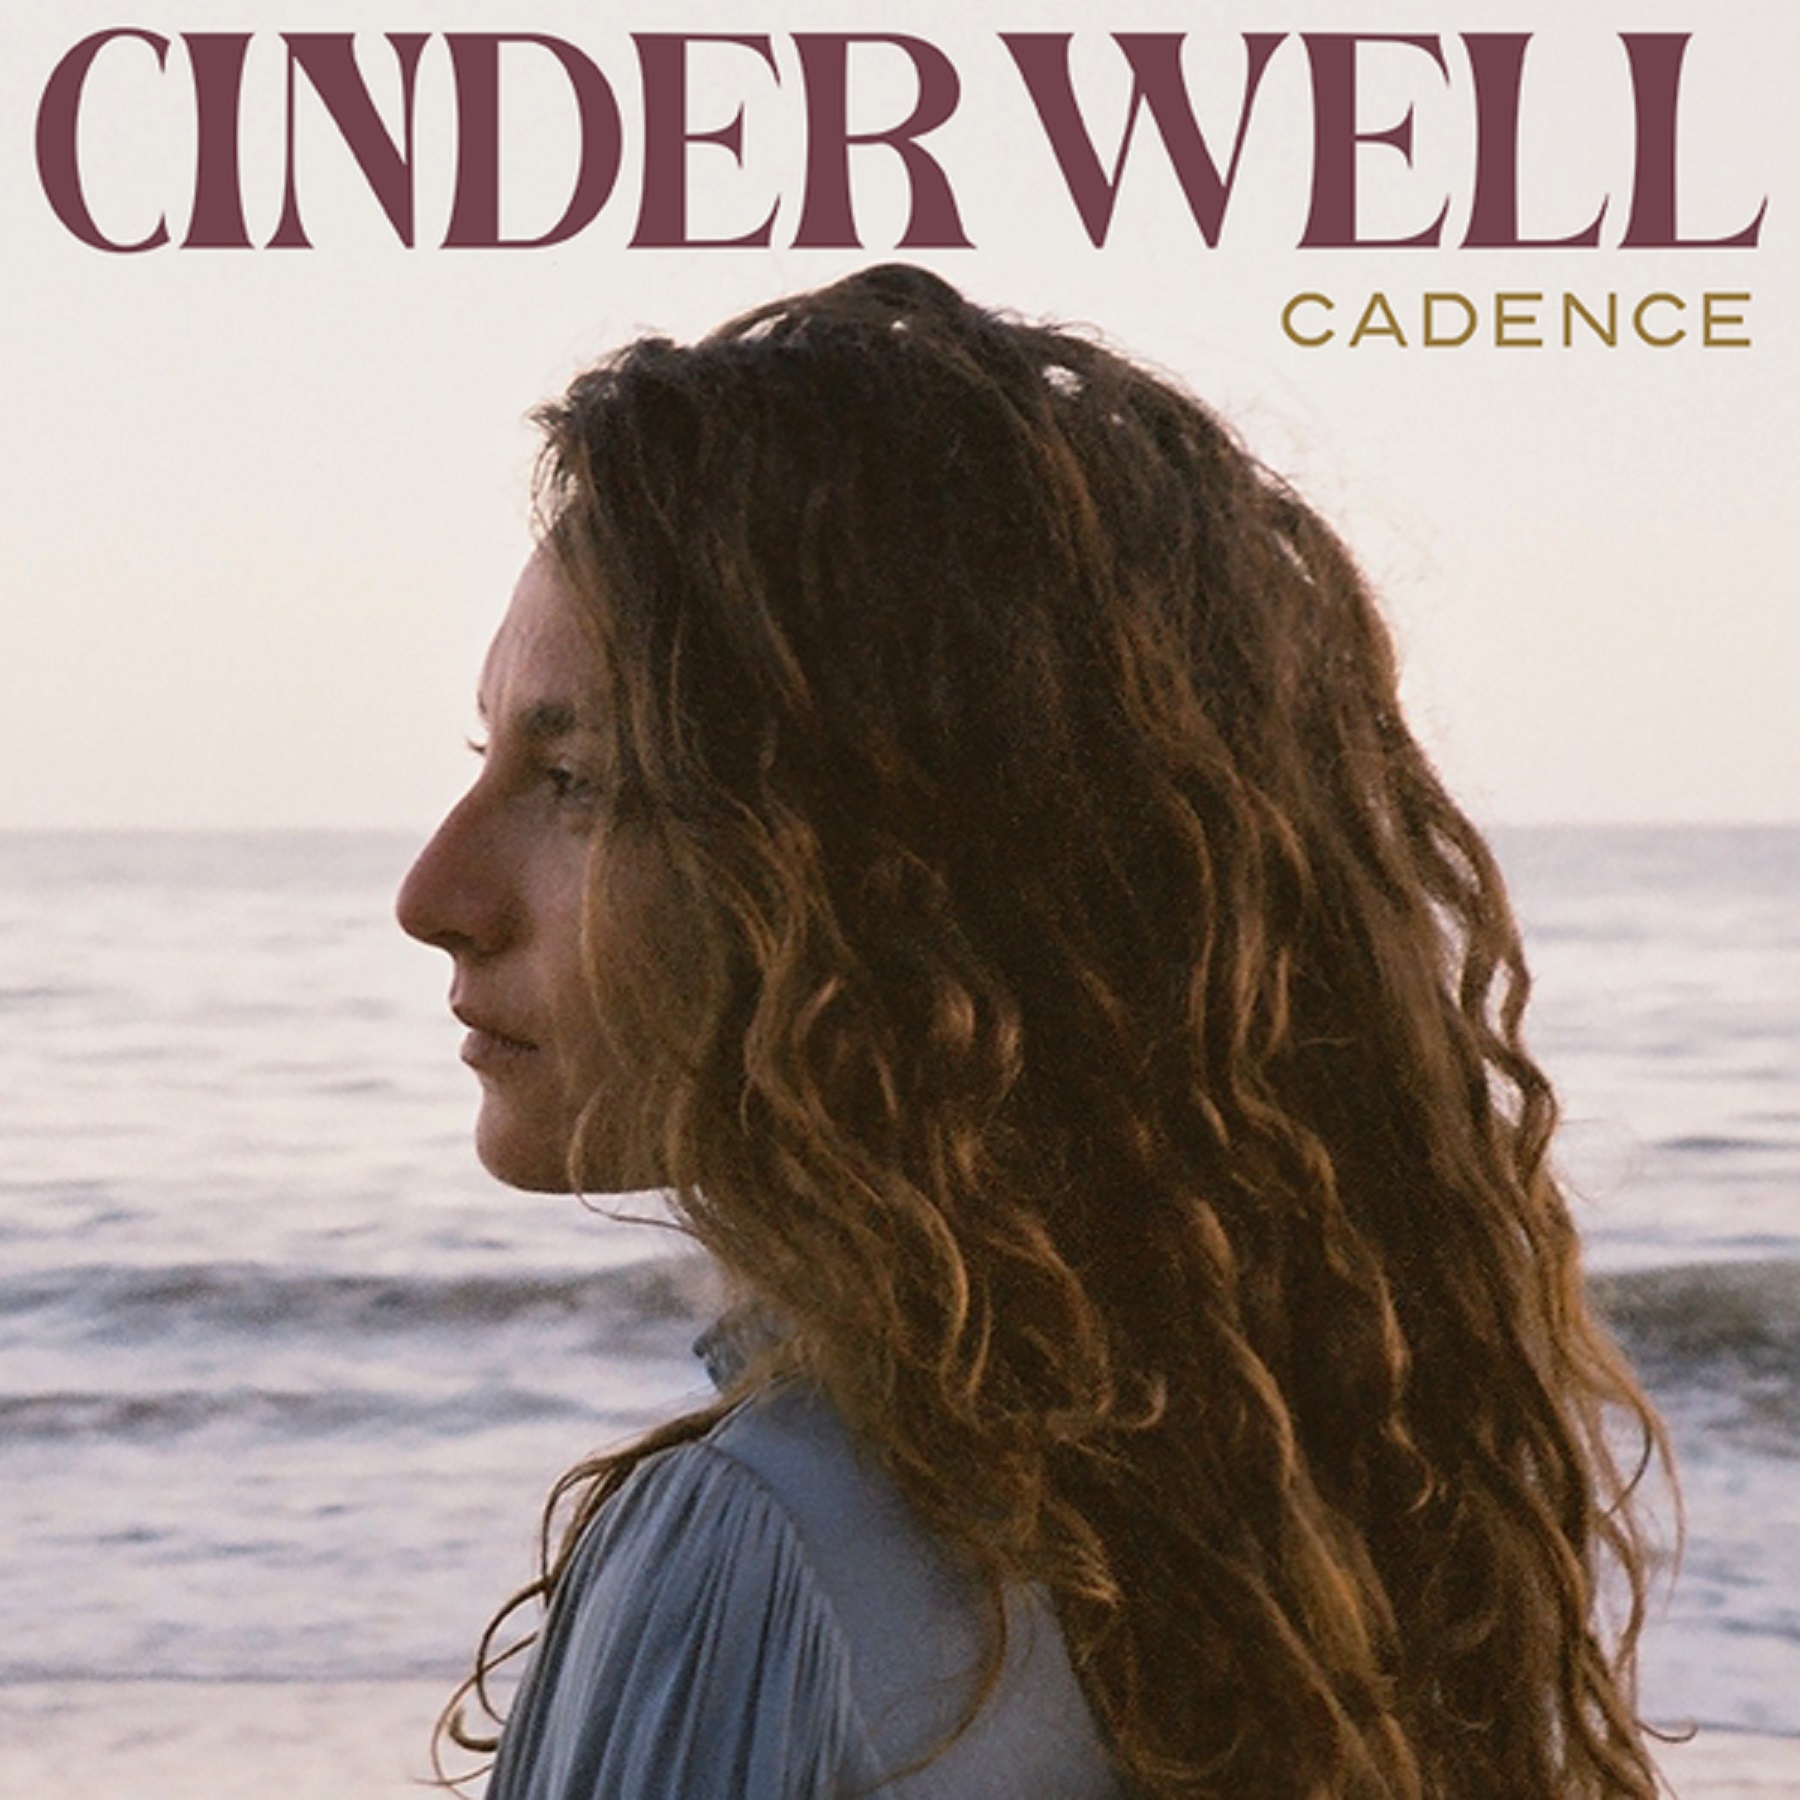 Cinder Well’s New Album, Cadence, Coming April 21